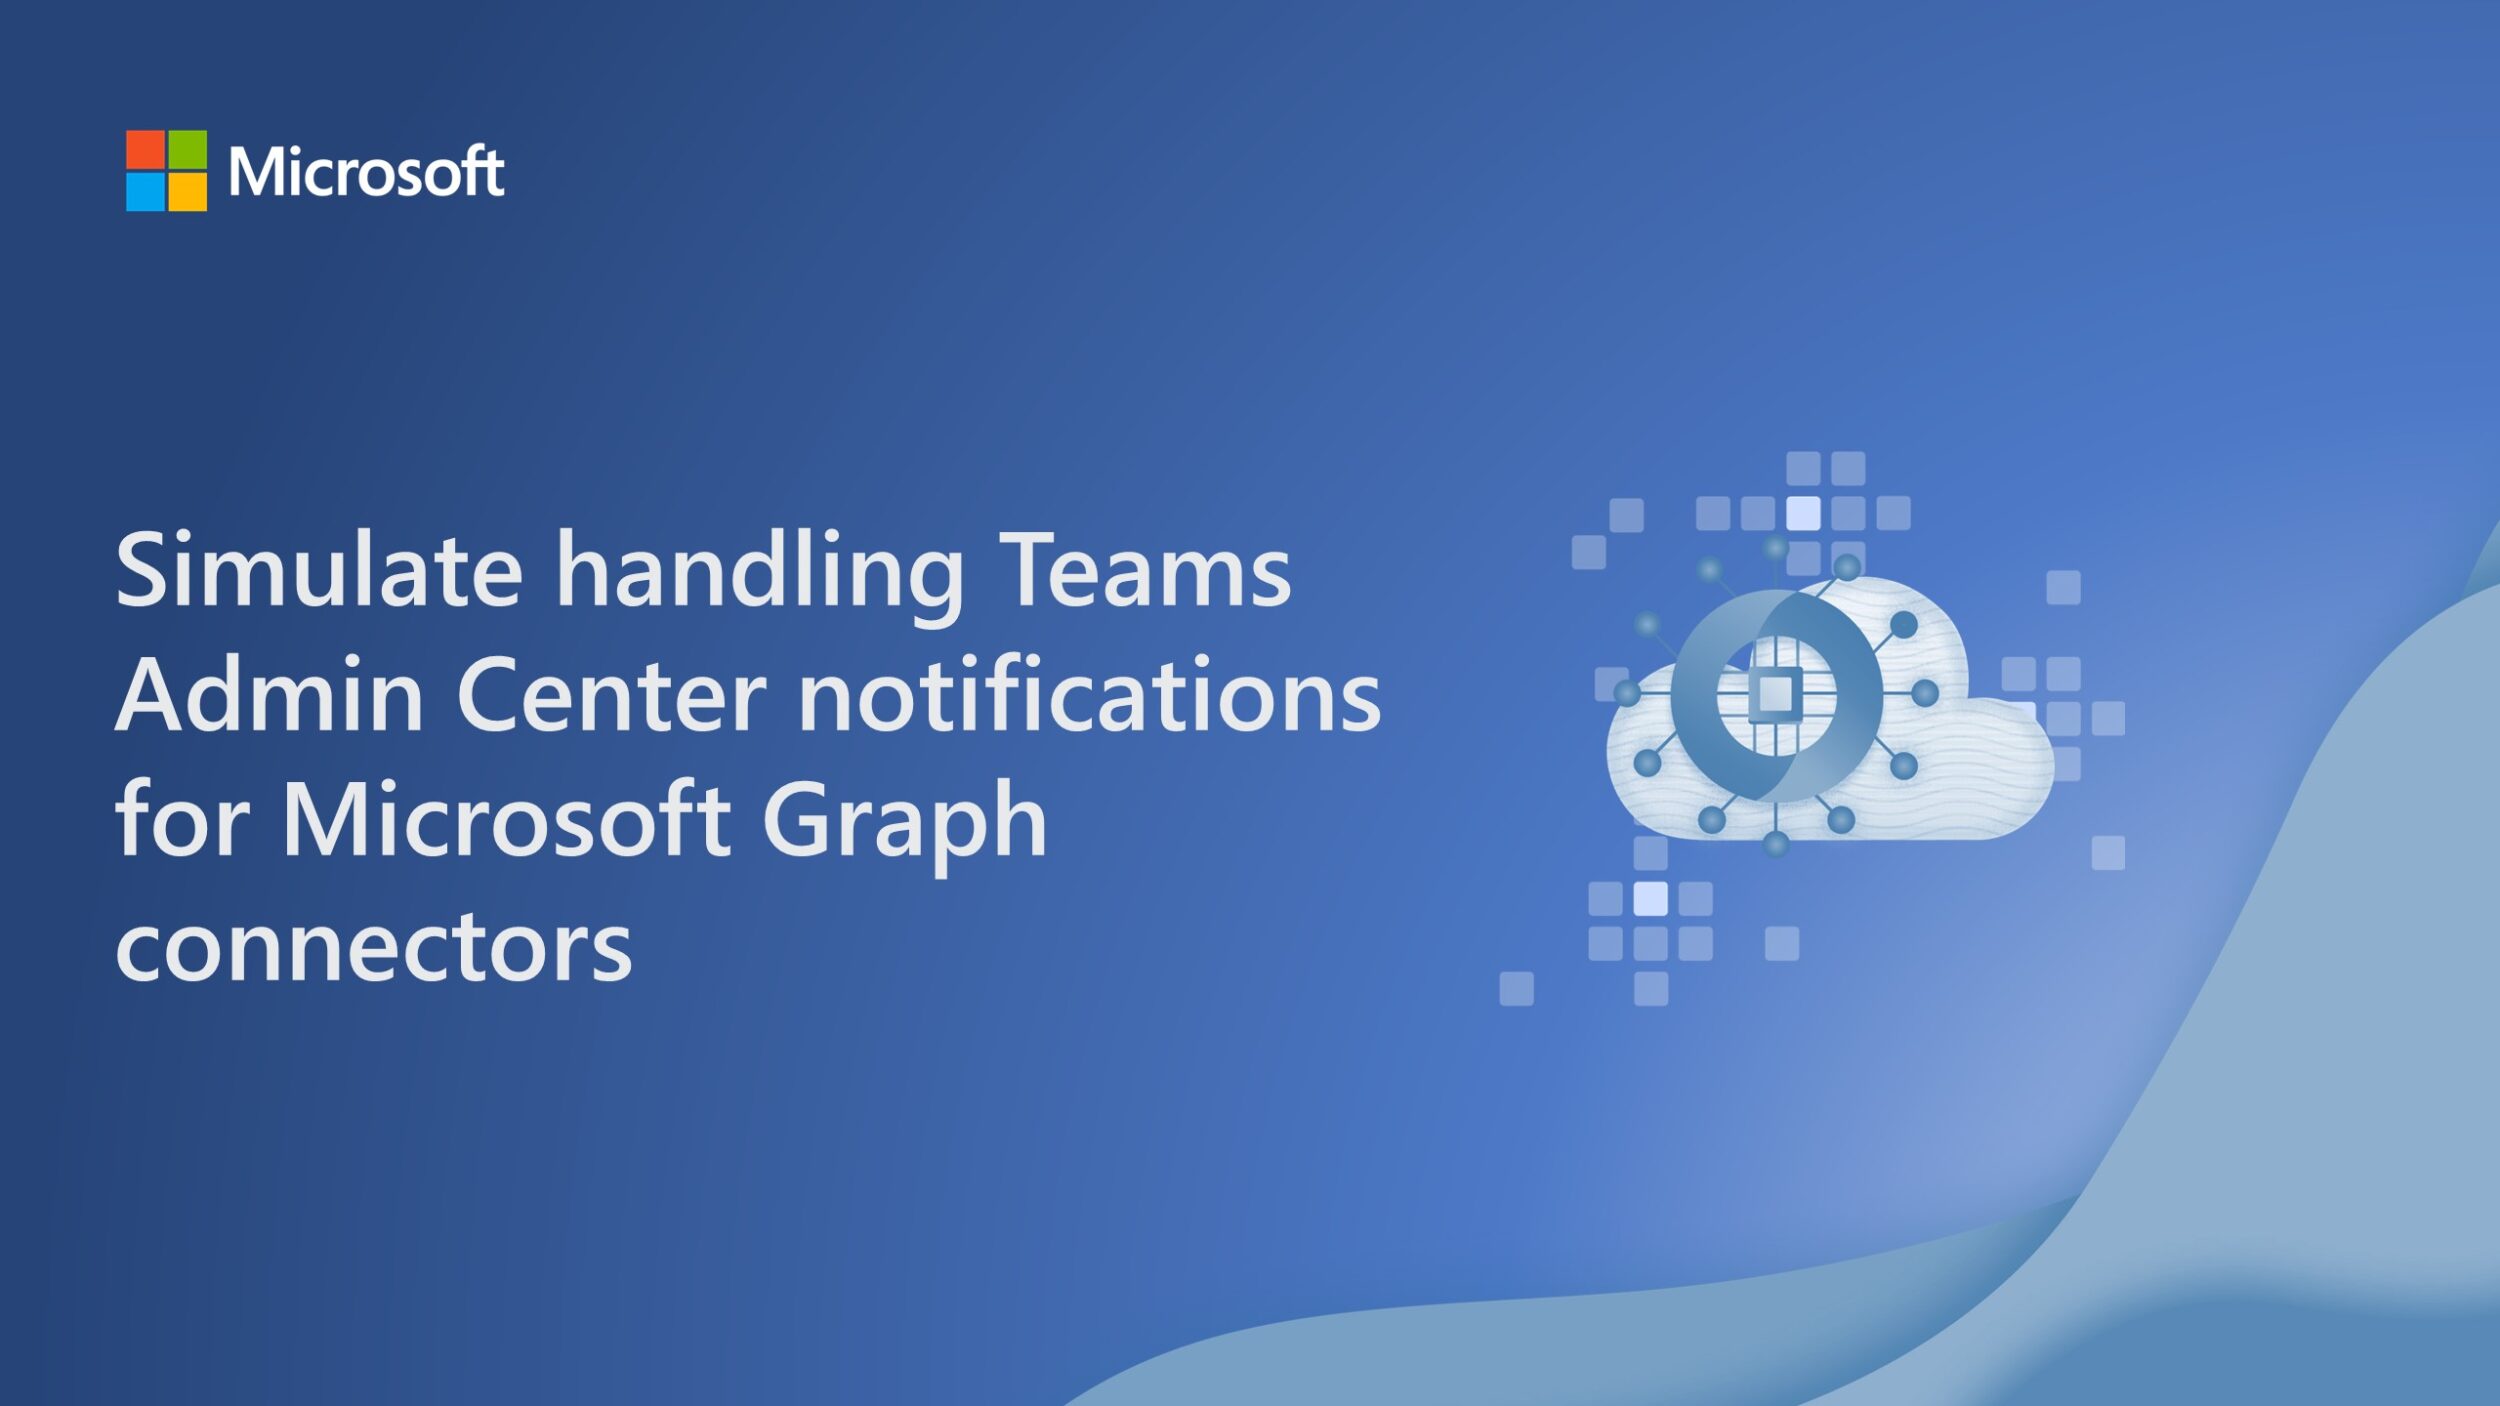 Simulate handling Teams Admin Center notifications for Microsoft Graph connectors